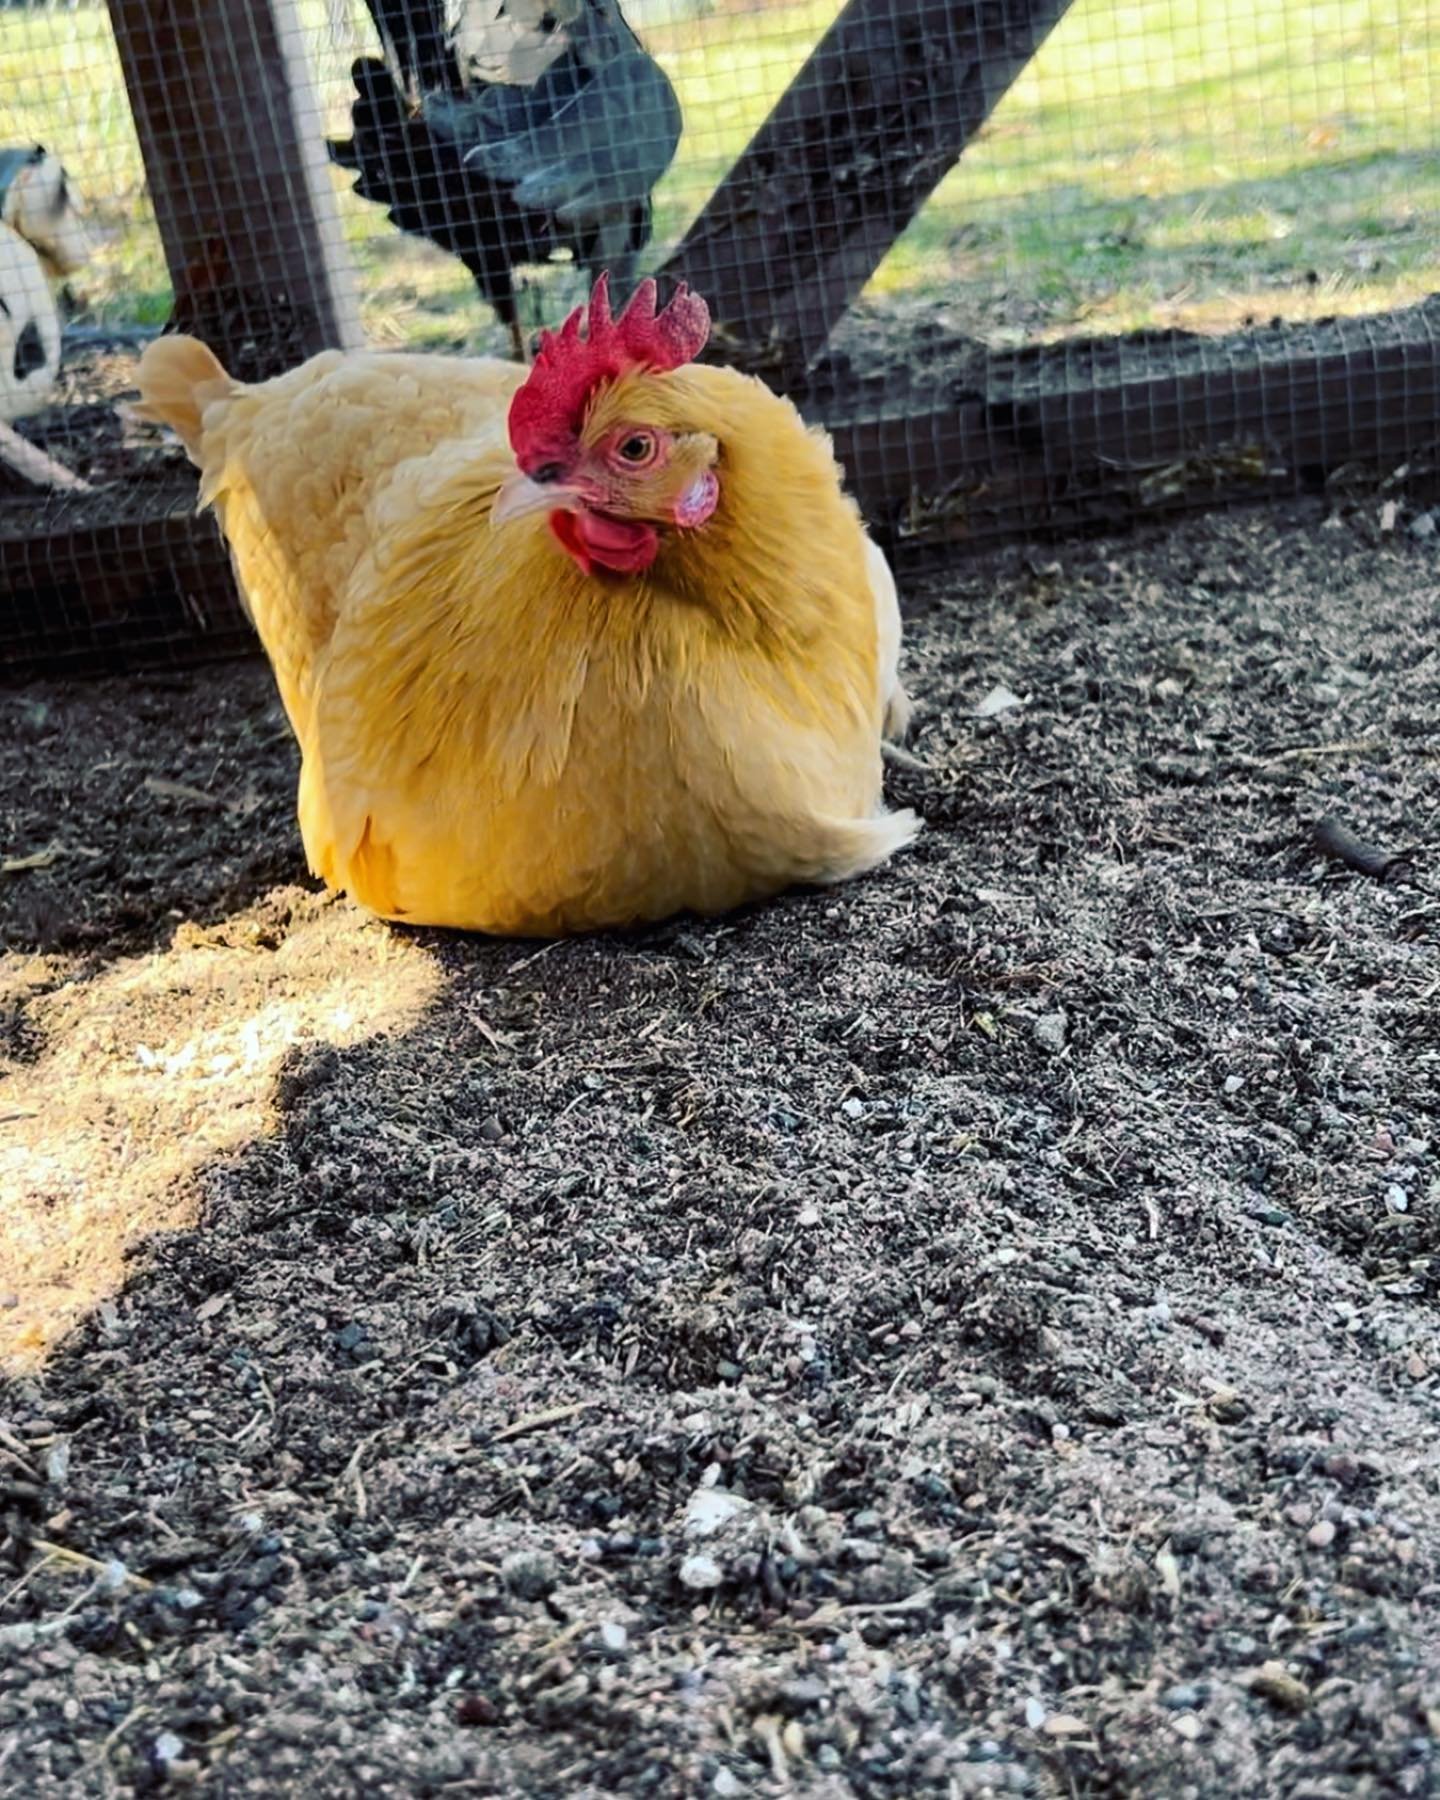 Little Chicken Loaf 🍞 for some weekly chicken content 🐔